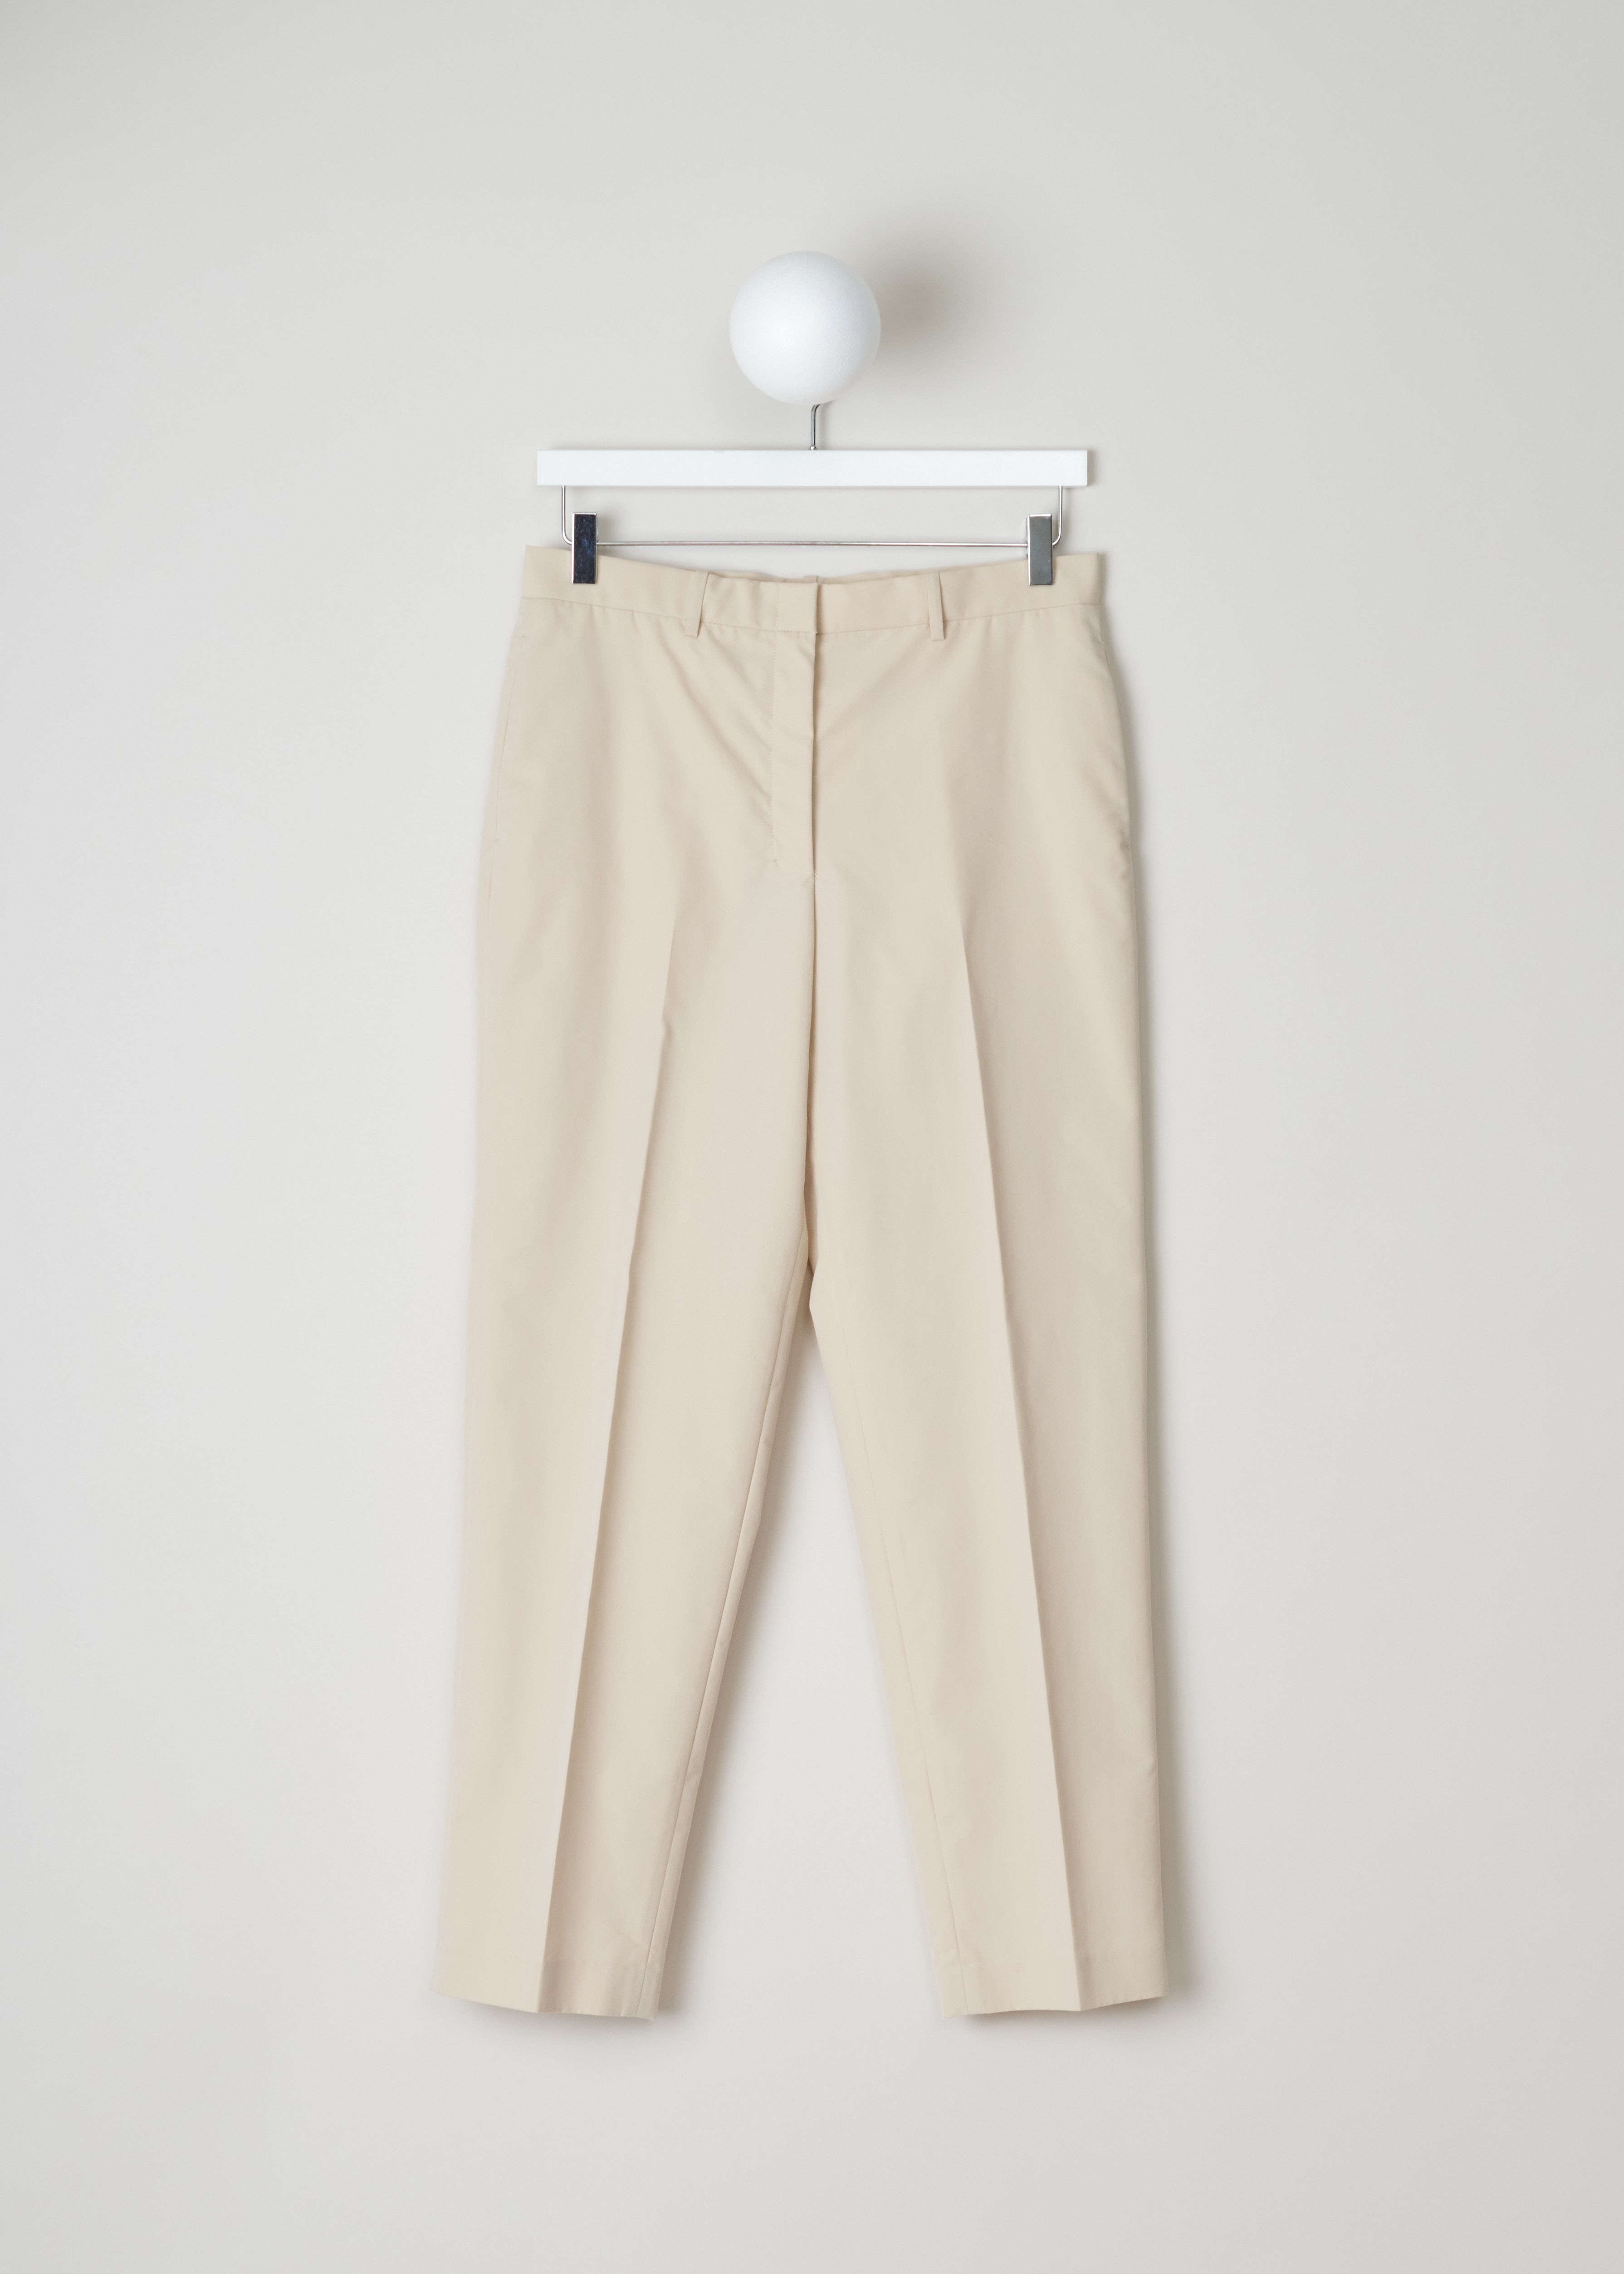 The Row mapion pant MAPION_PANT_1_595W534 pearl front. Pearl coloured Mapion pant with side pockets, welt pocket at the back with button closure, natural waist rise, straight legs and centre creases.â€ƒ